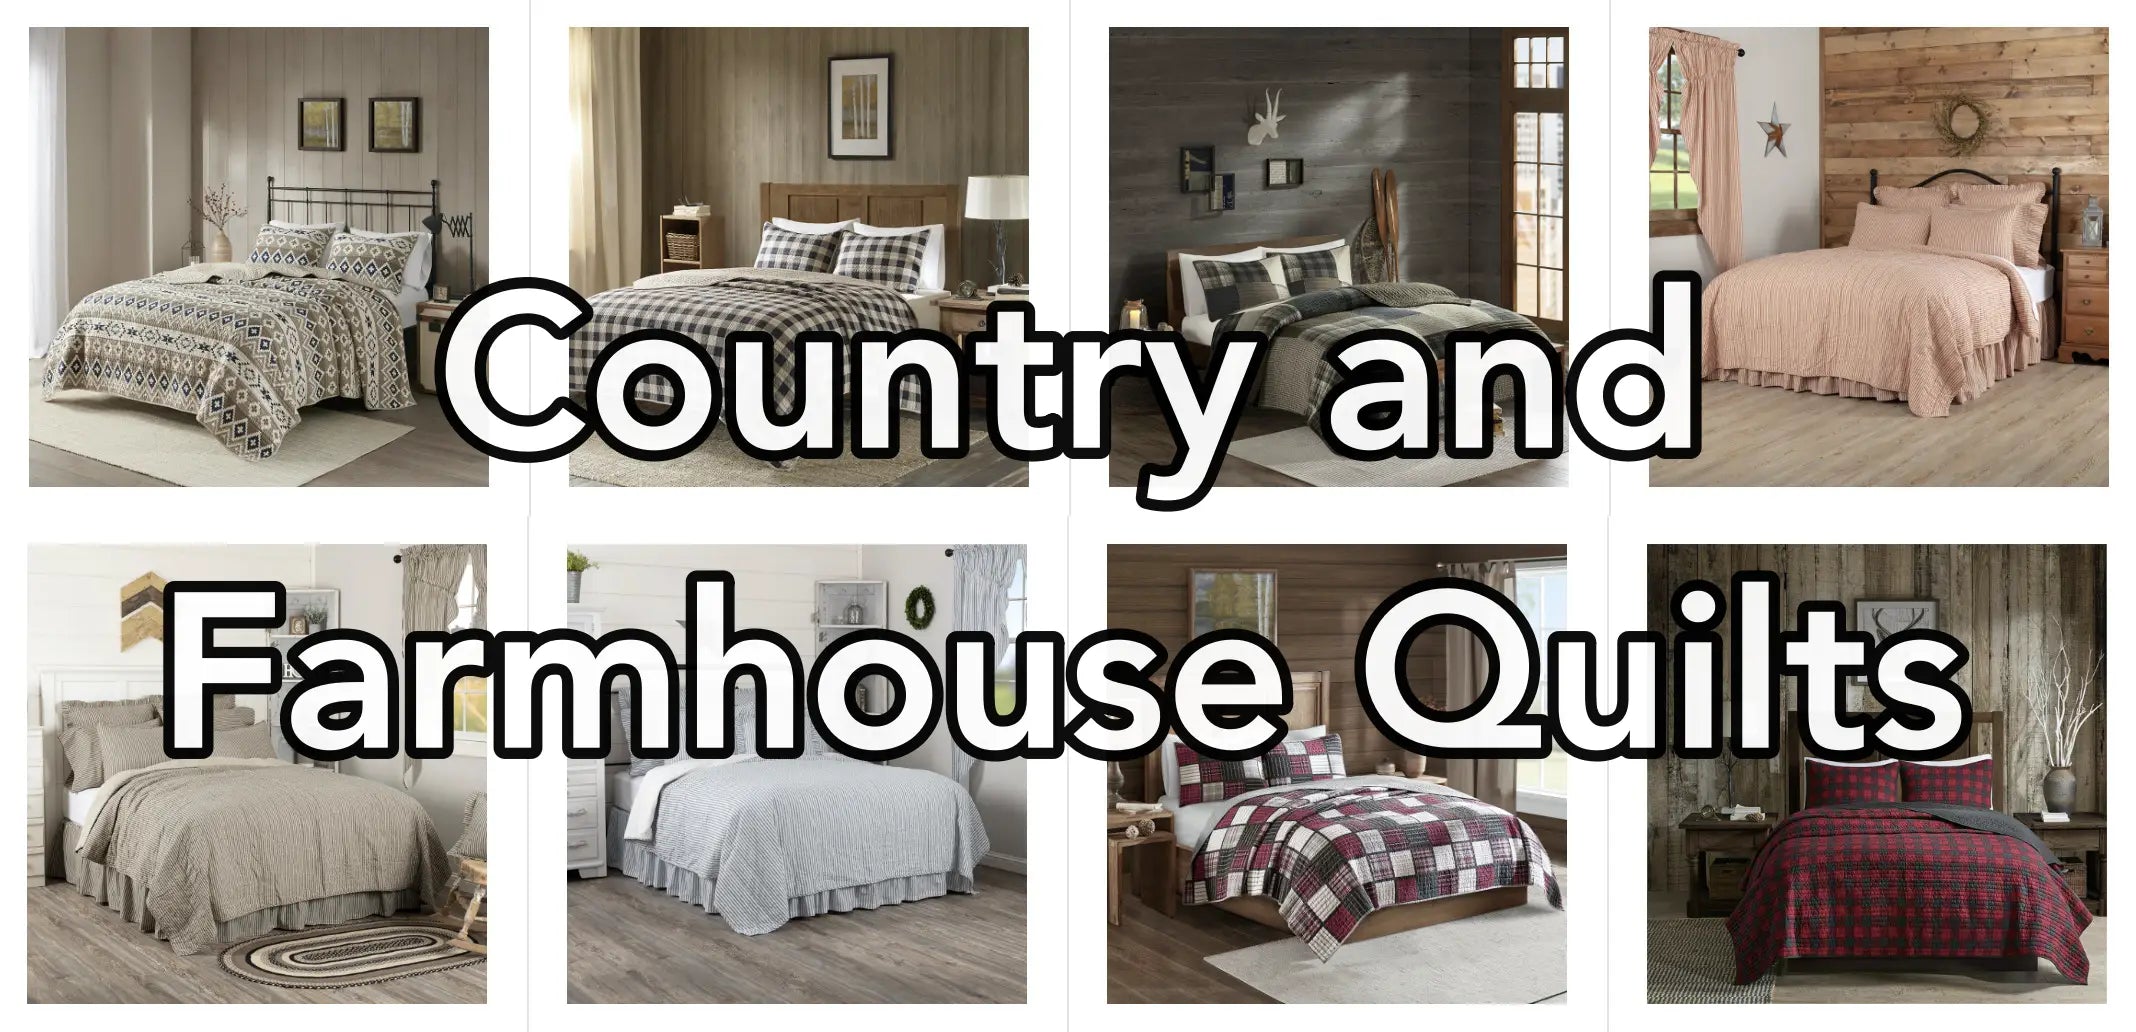 Country and Farmhouse Quilts